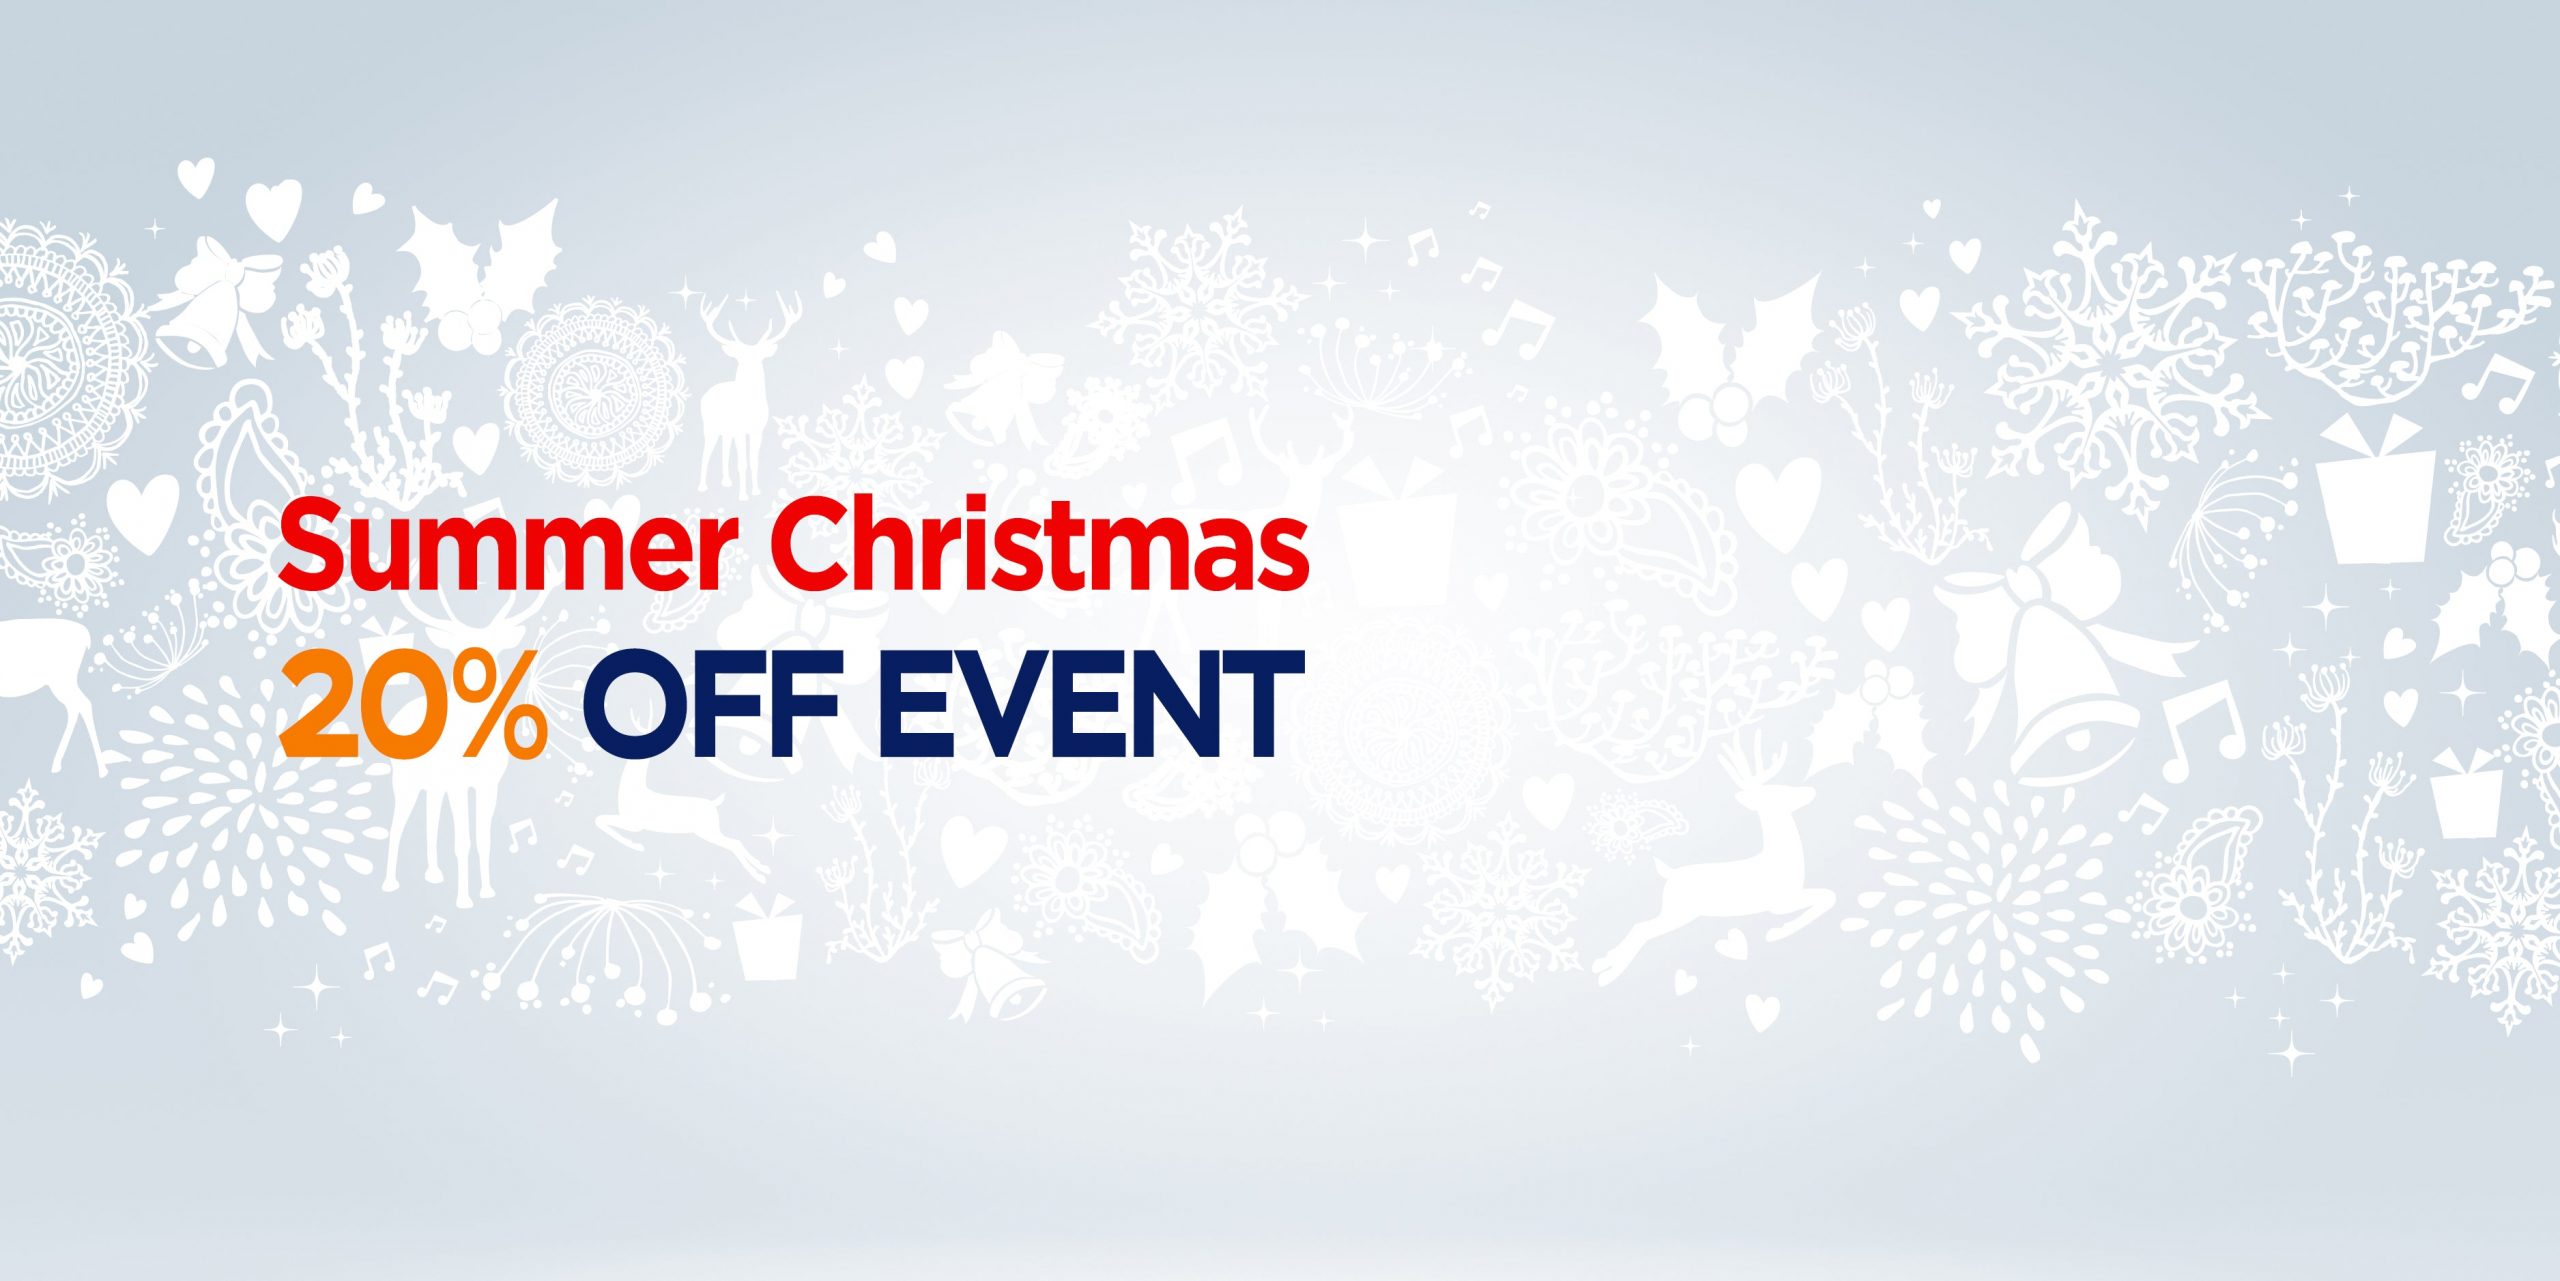 Summer Christmas 20% OFF EVENT & FREE Topper cover - Navien Mate